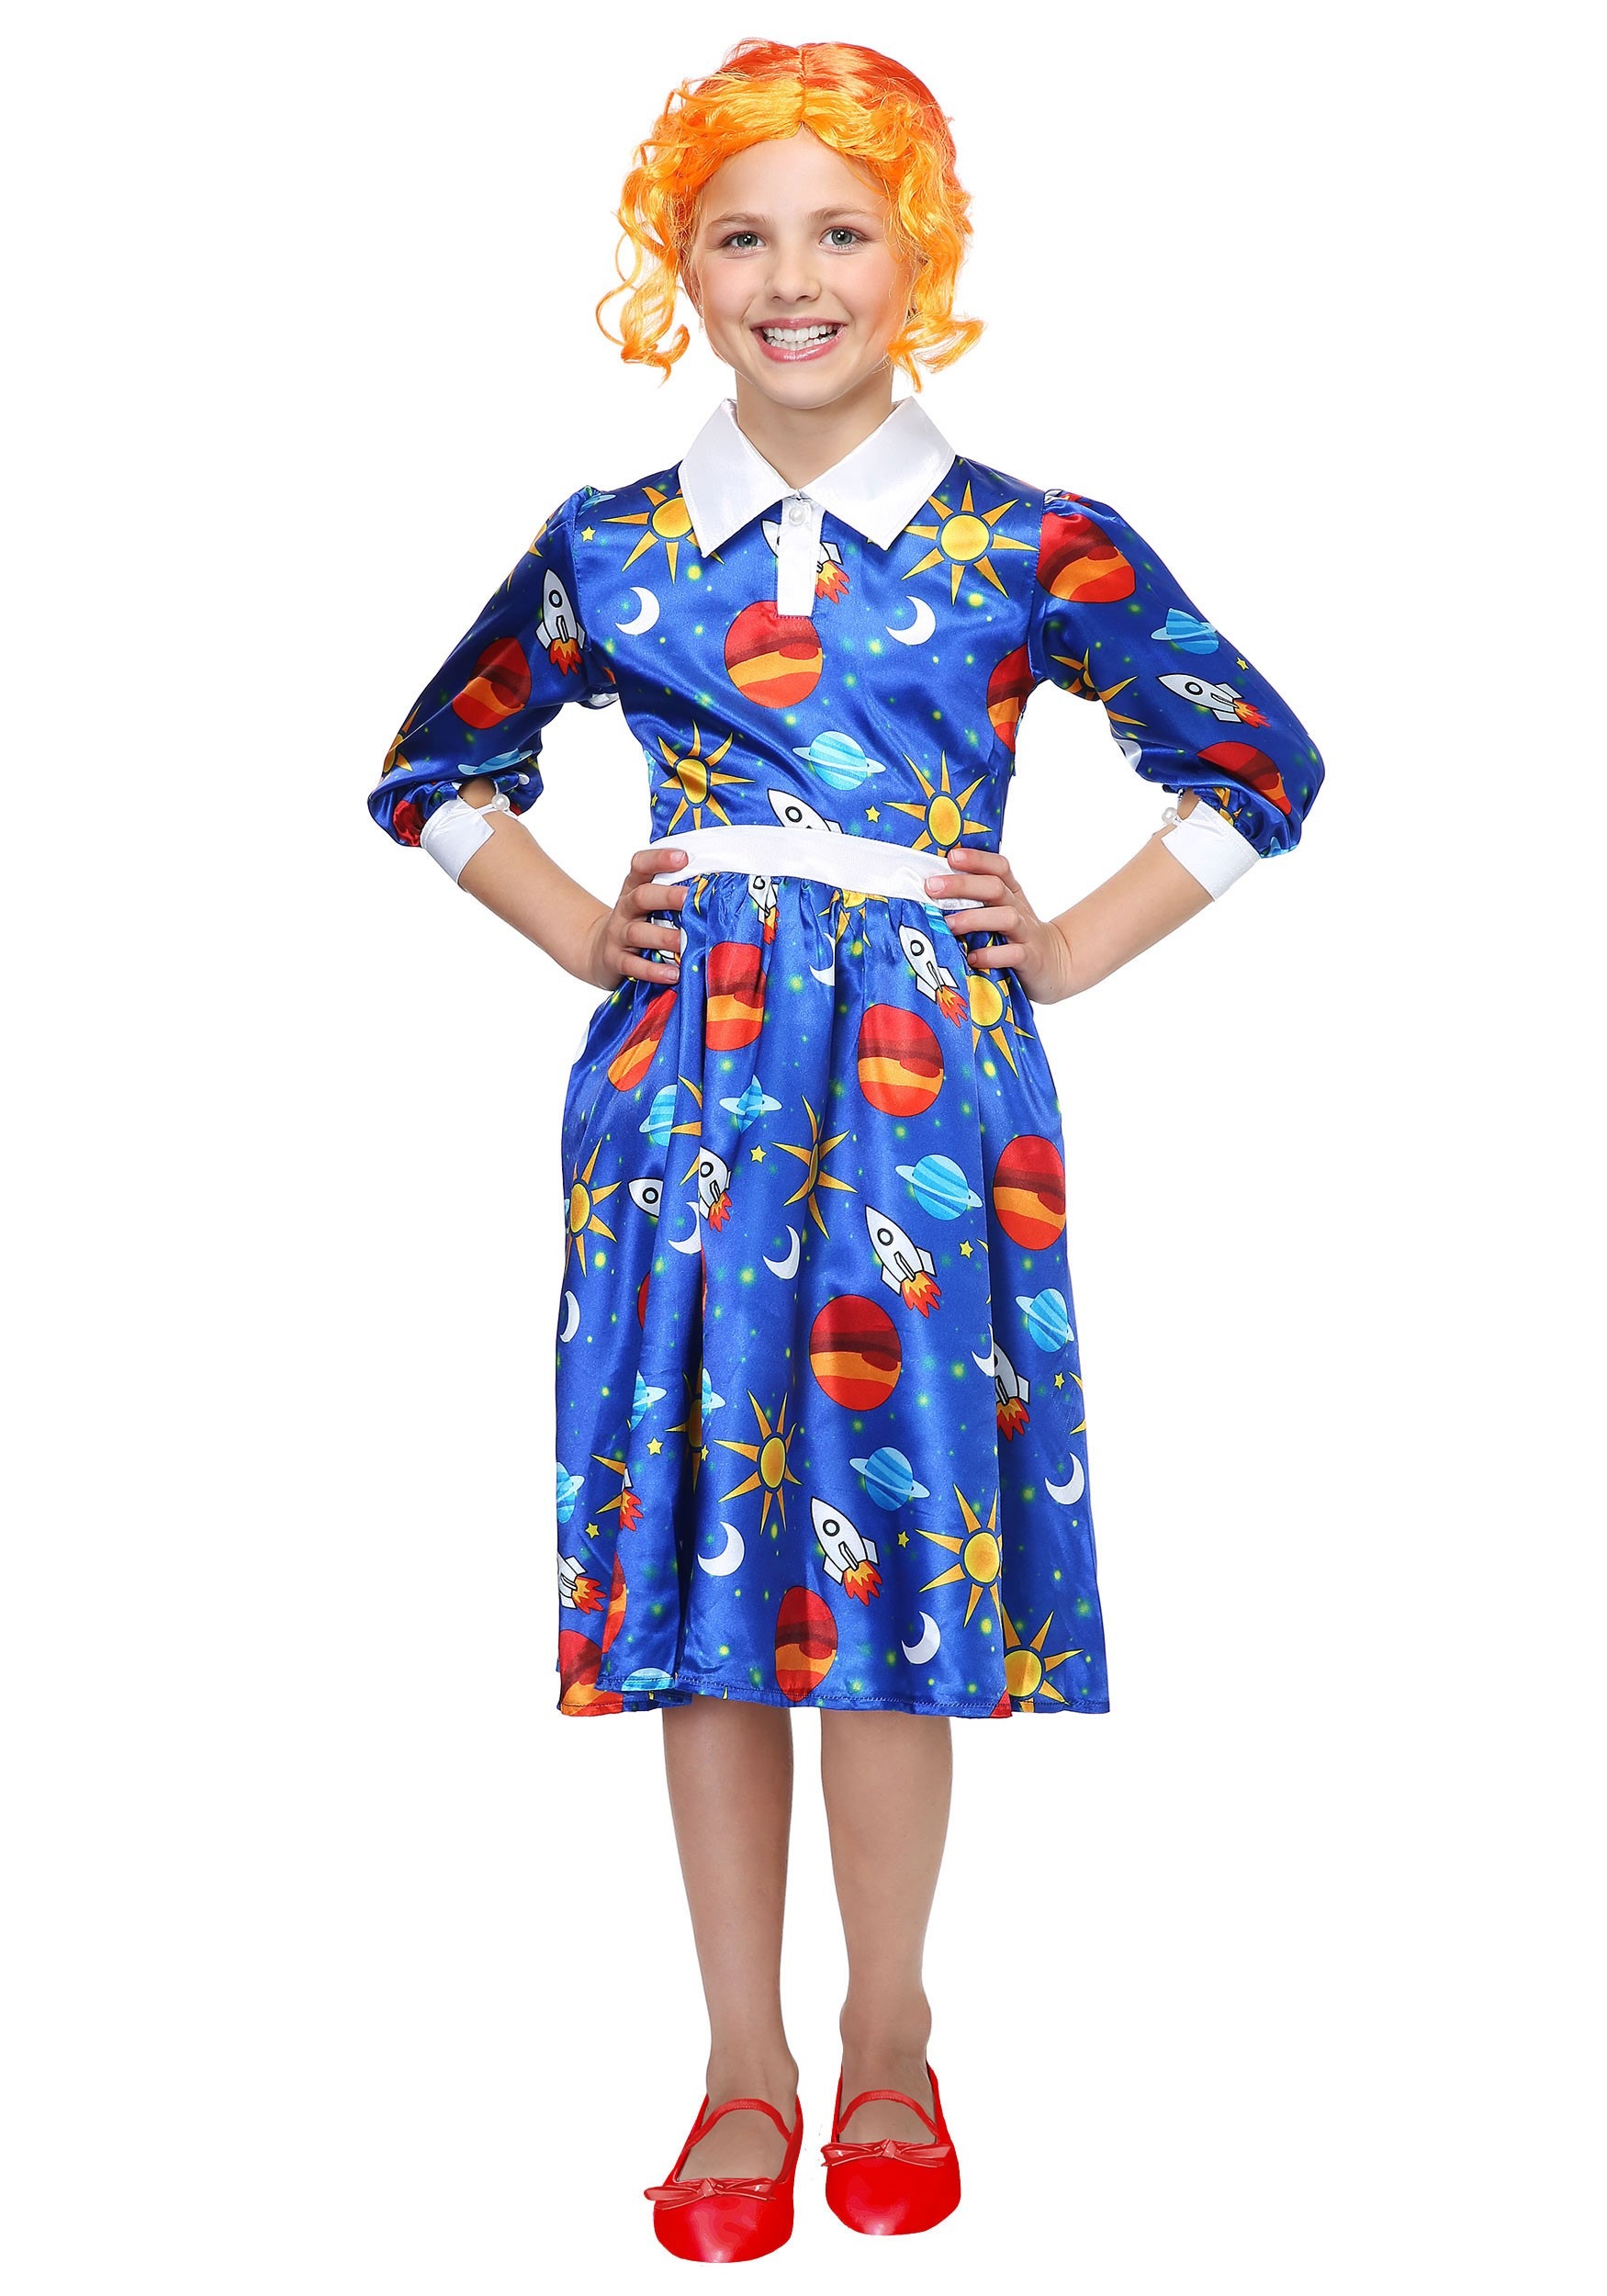 Photos - Fancy Dress MAGIC FUN Costumes  School Bus Ms. Frizzle Costume for Kids | Science Hallo 